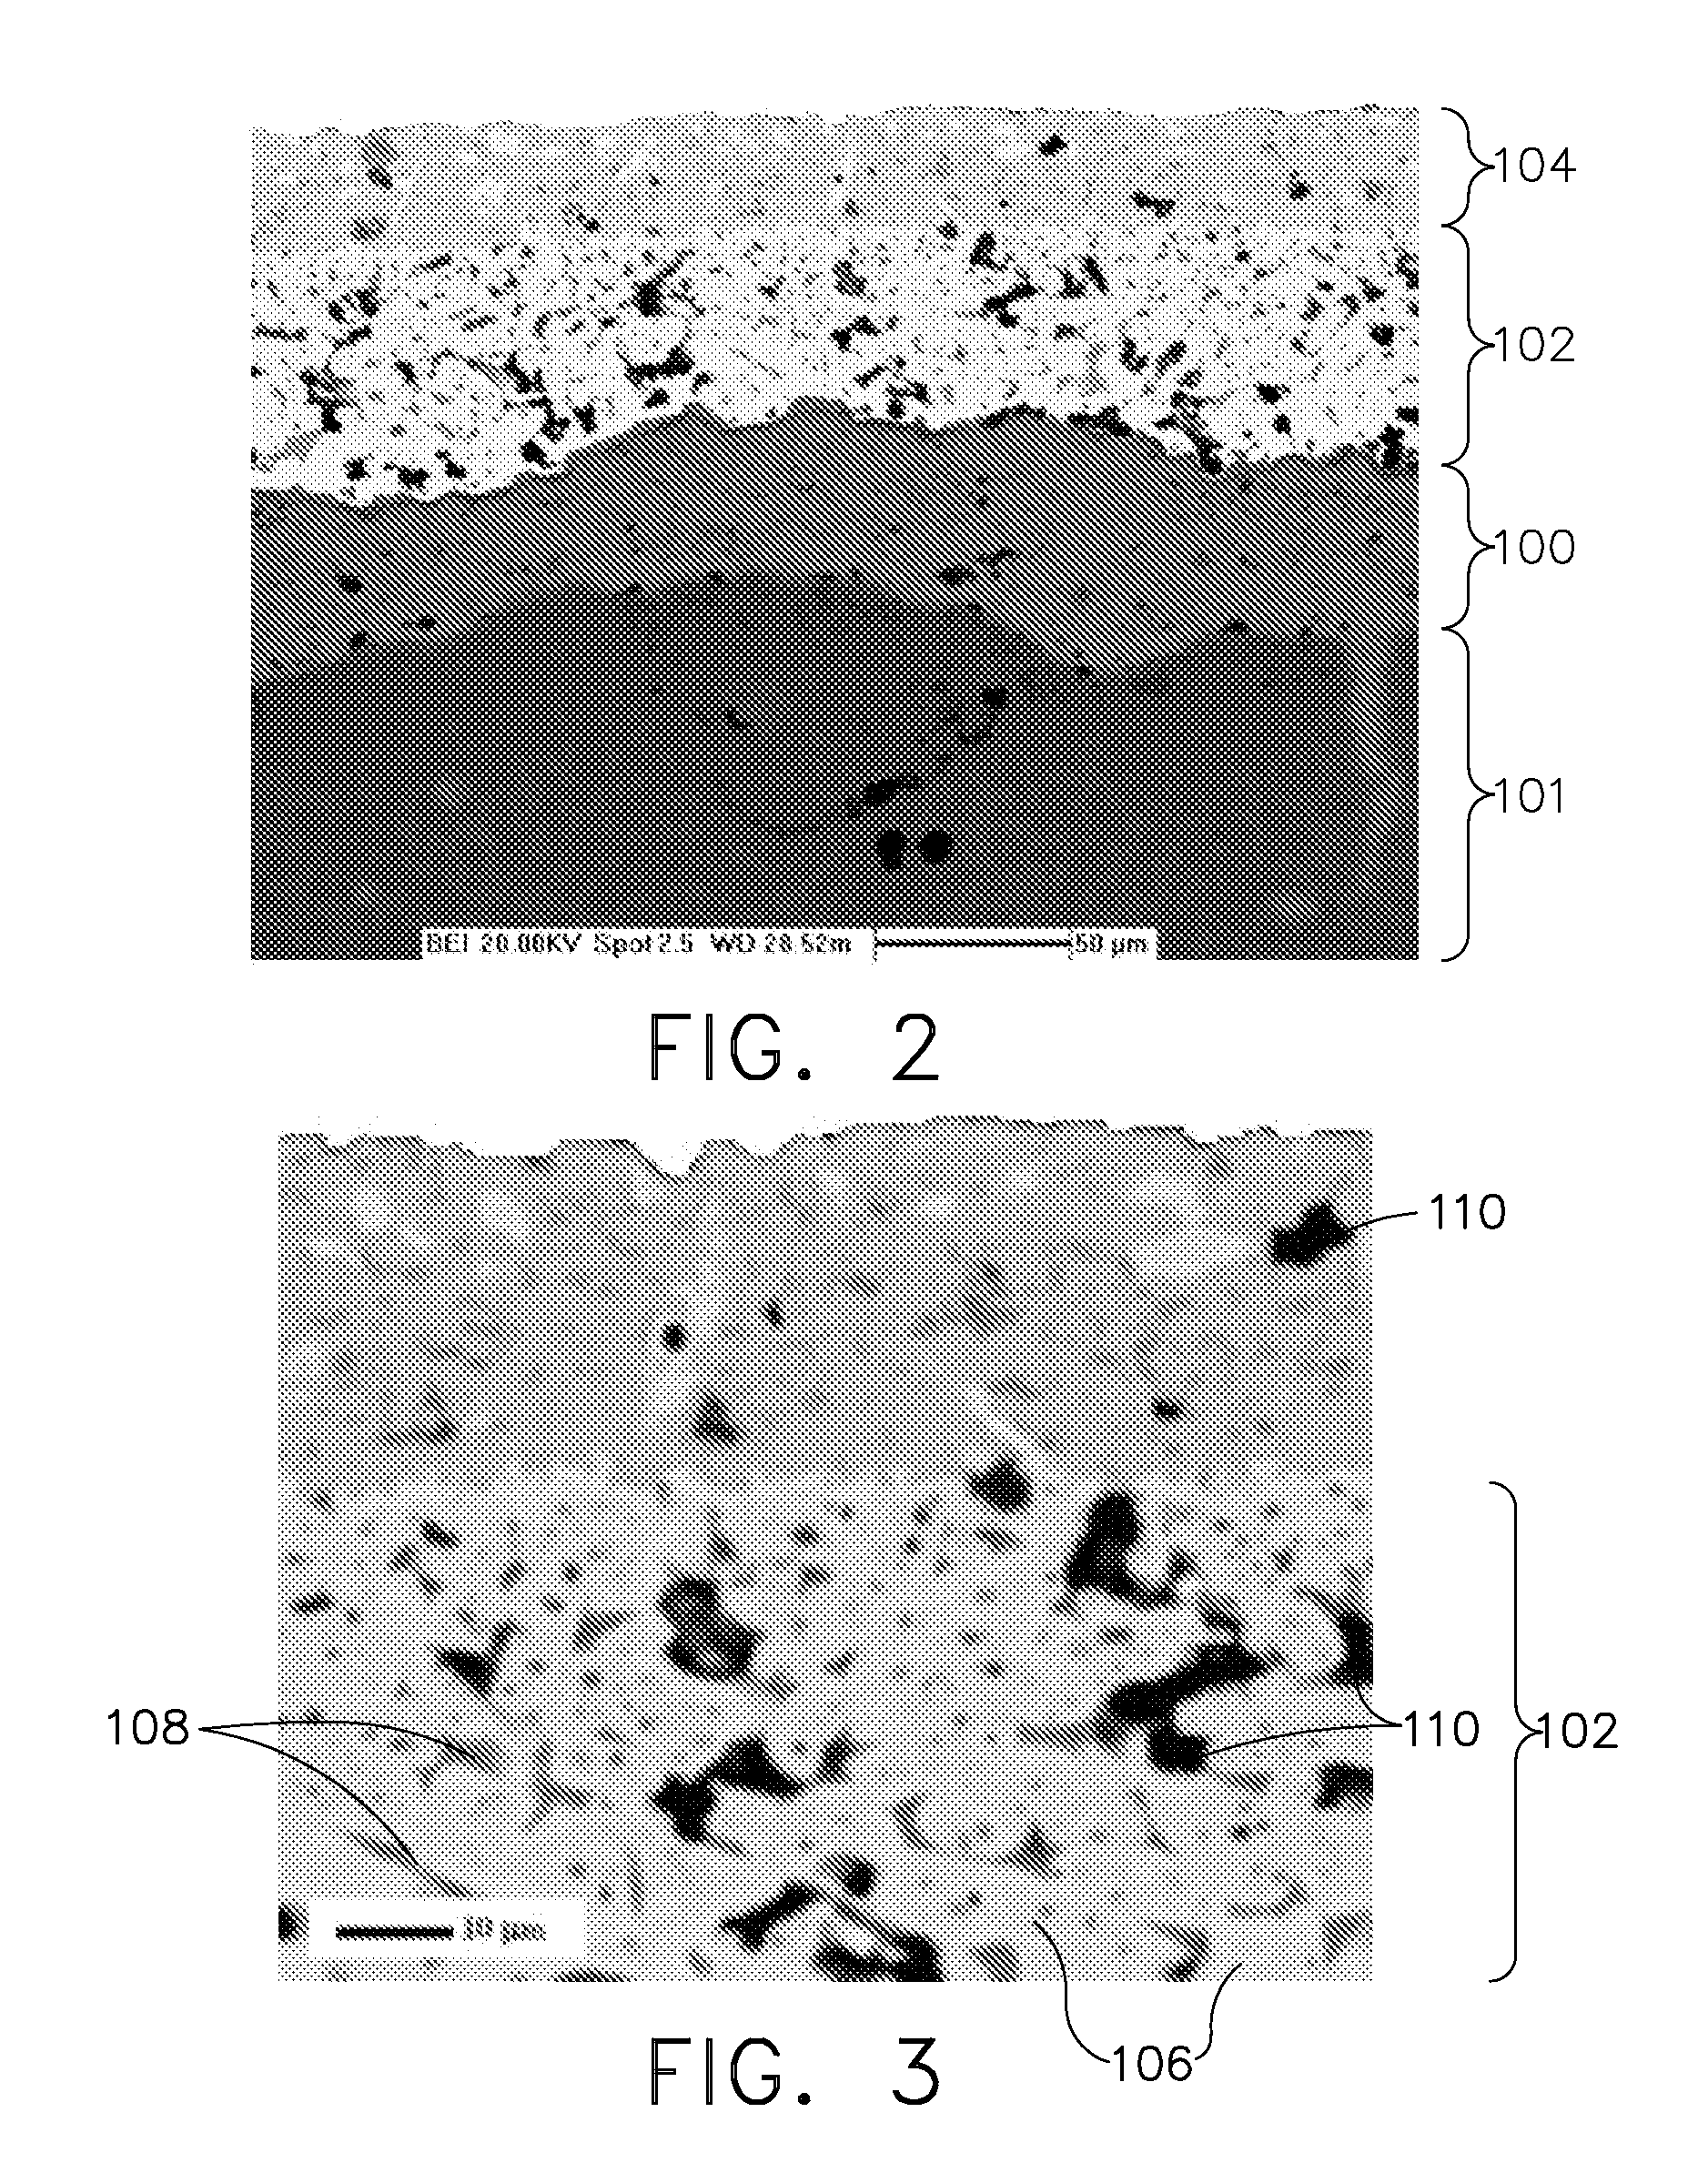 Methods of improving surface roughness of an environmental barrier coating and components comprising environmental barrier coatings having improved surface roughness